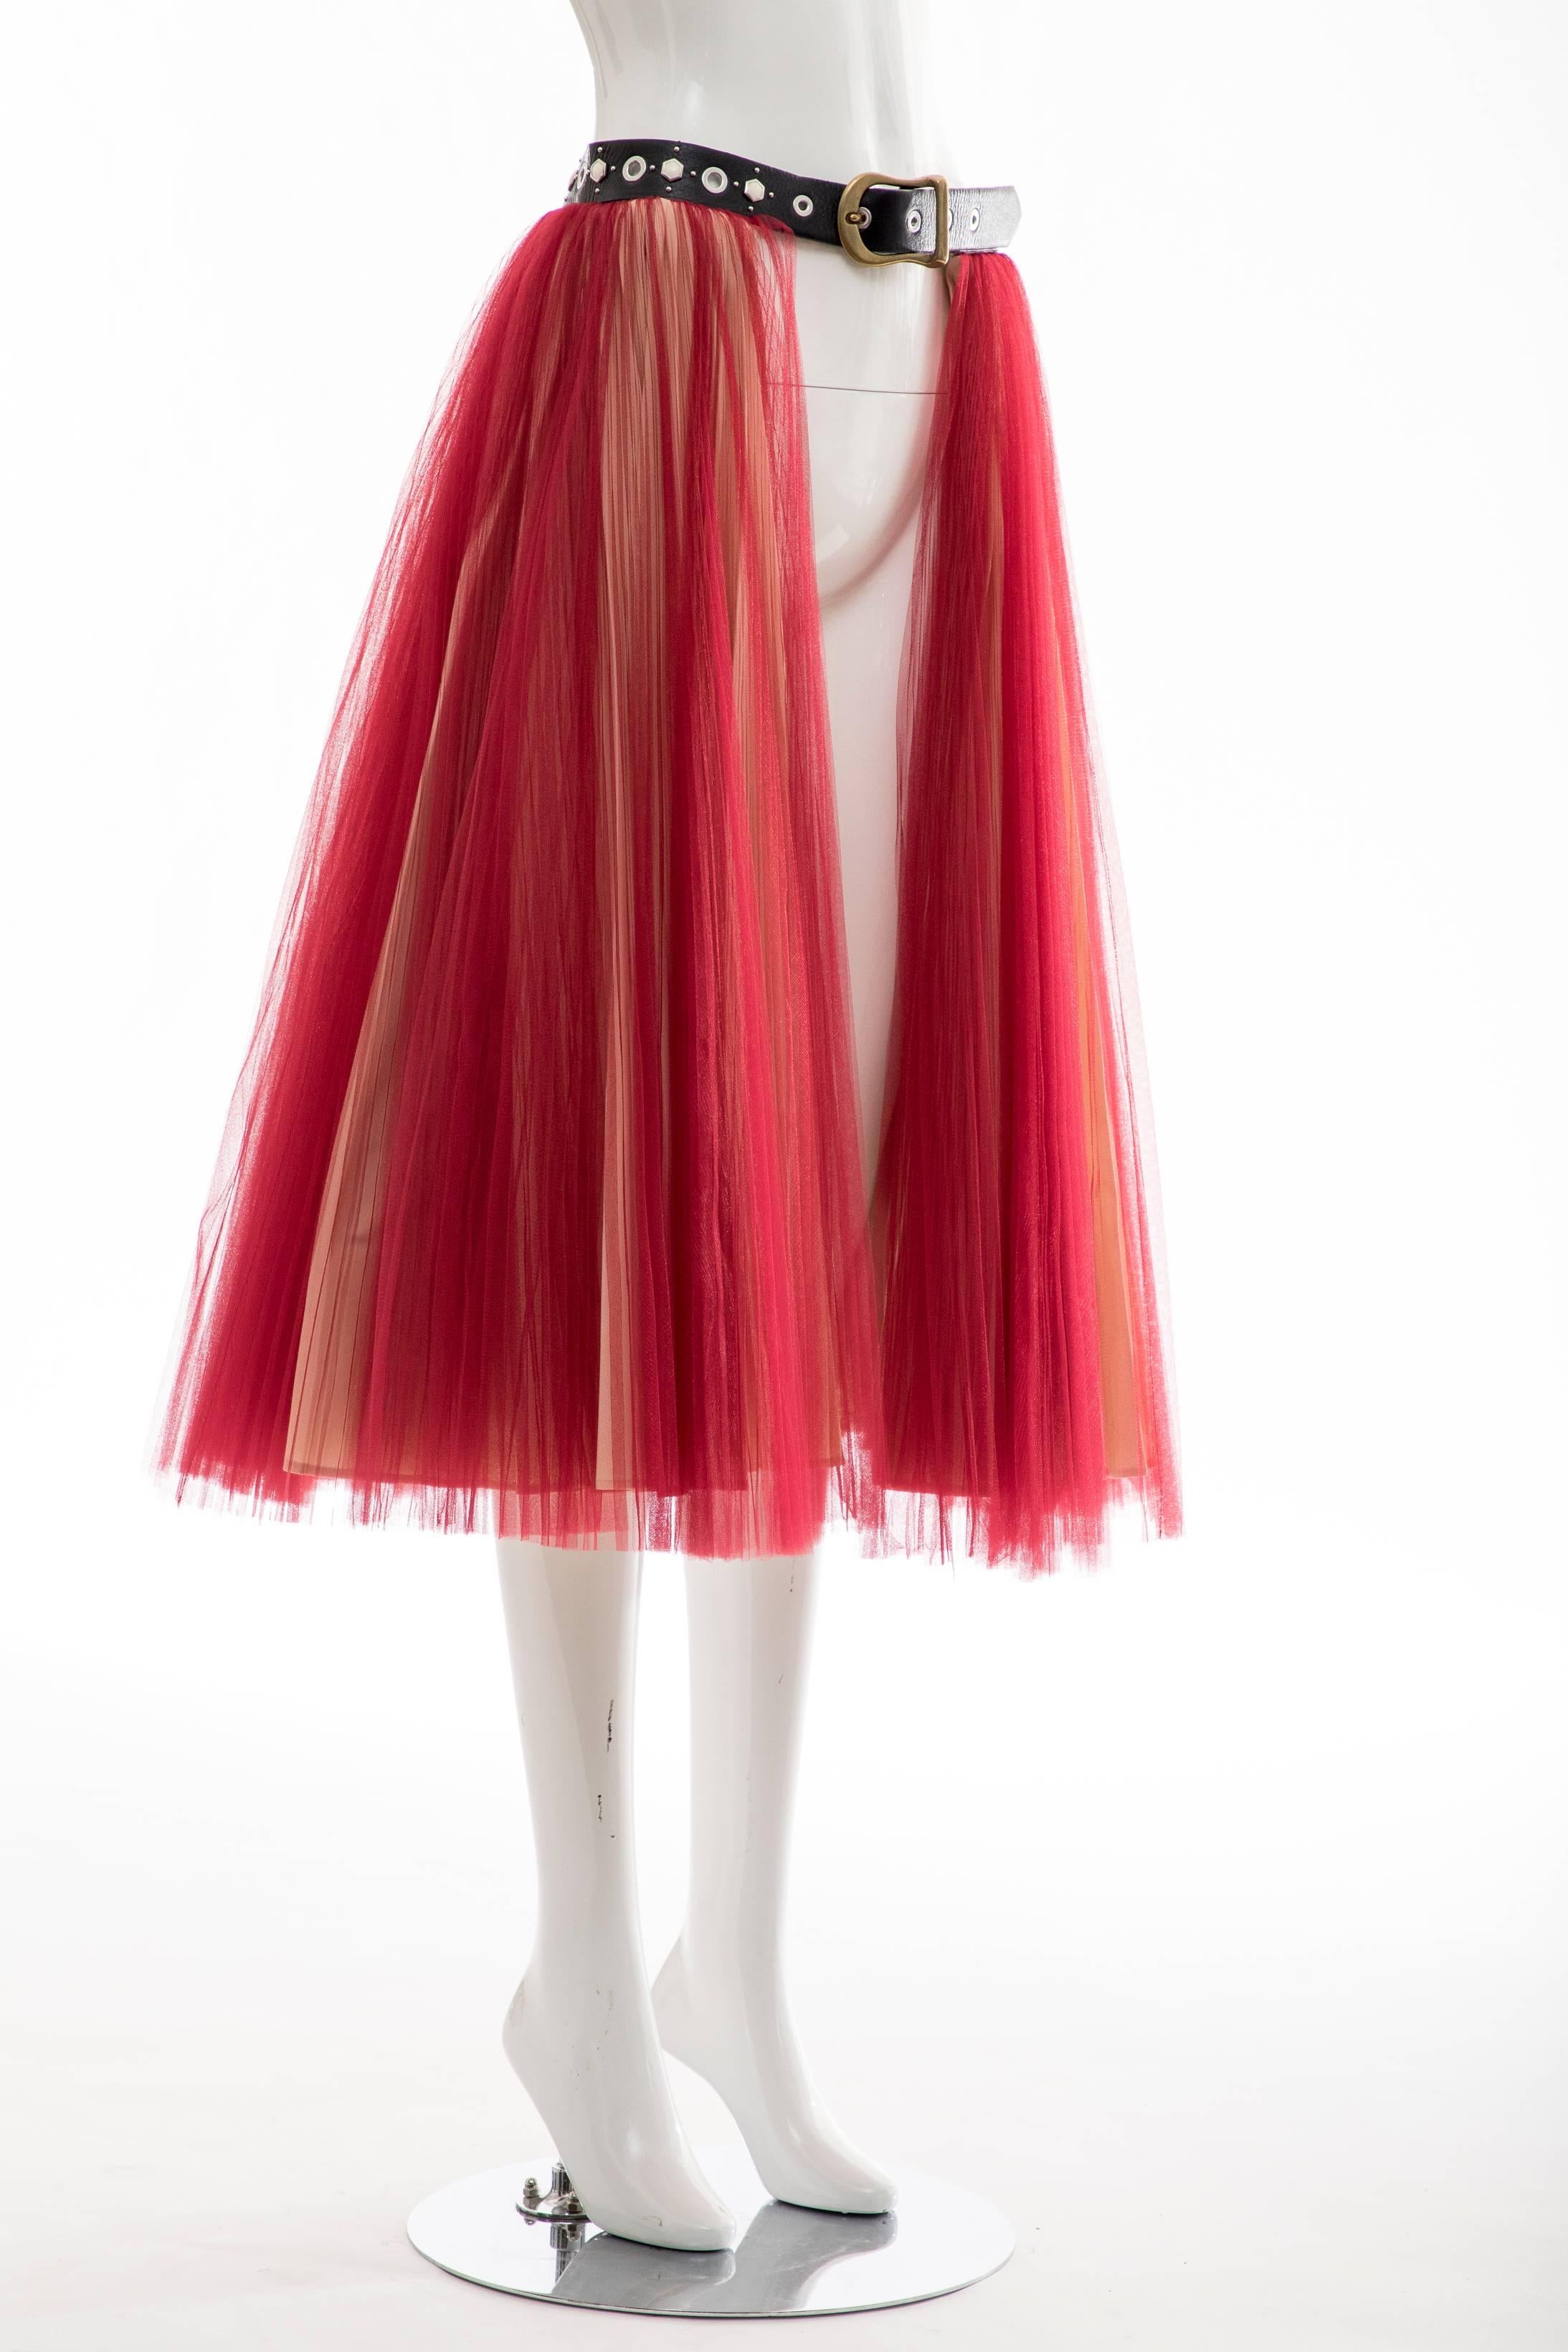 Women's or Men's Undercover - Jun Takahashi Red Tulle Silver Pleated Skirt, Spring 2016